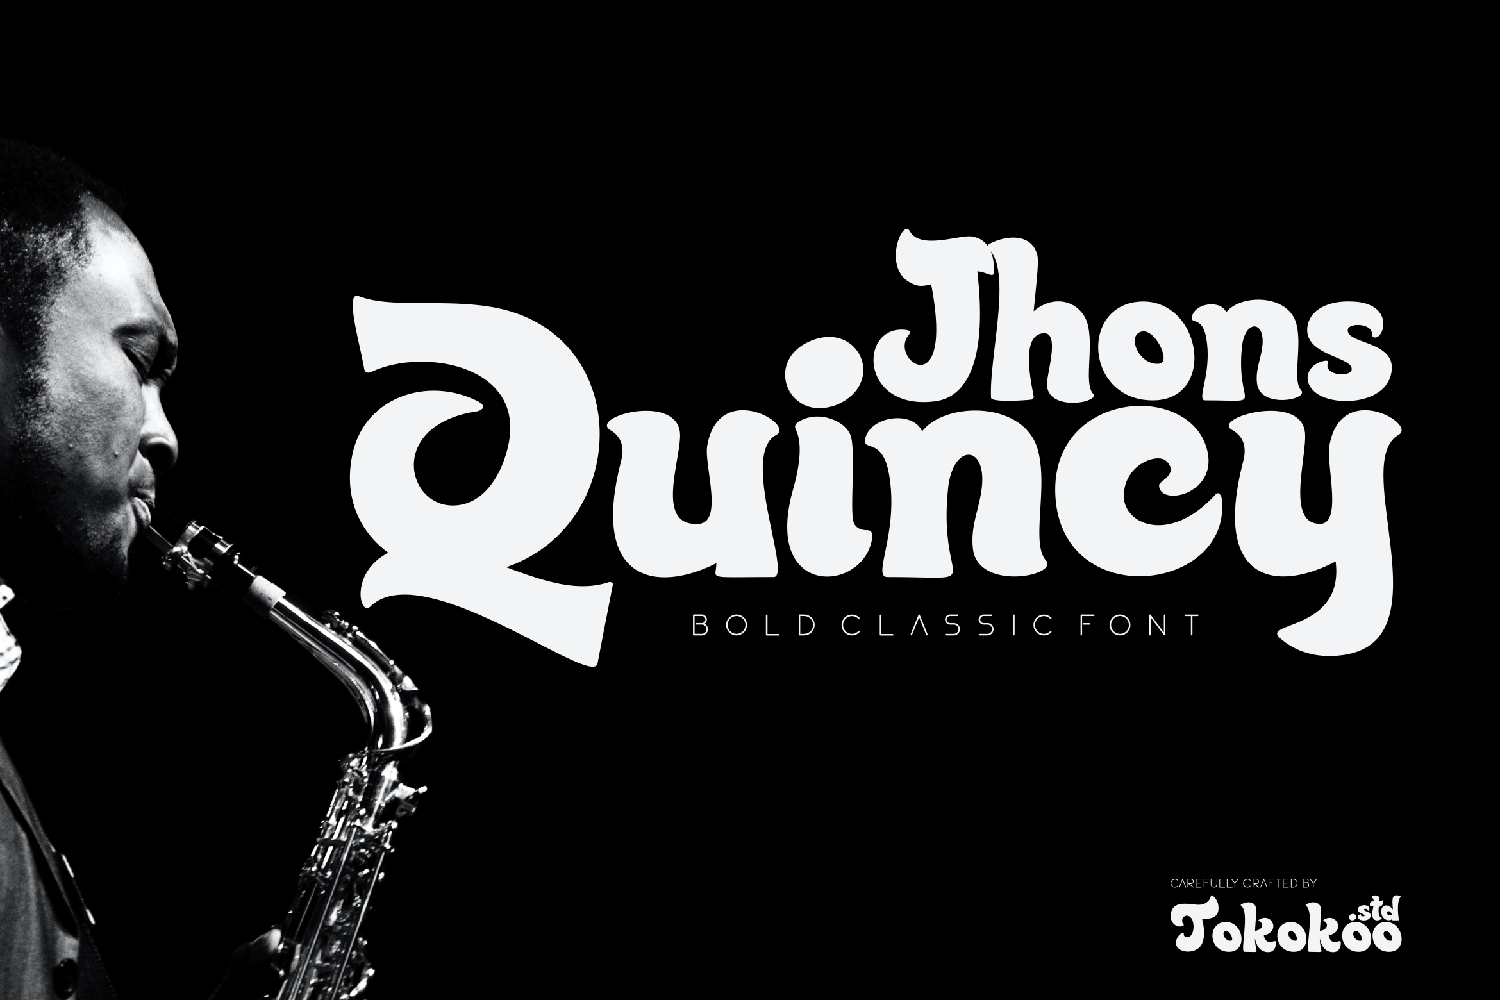 Quincy Jhons Free Font